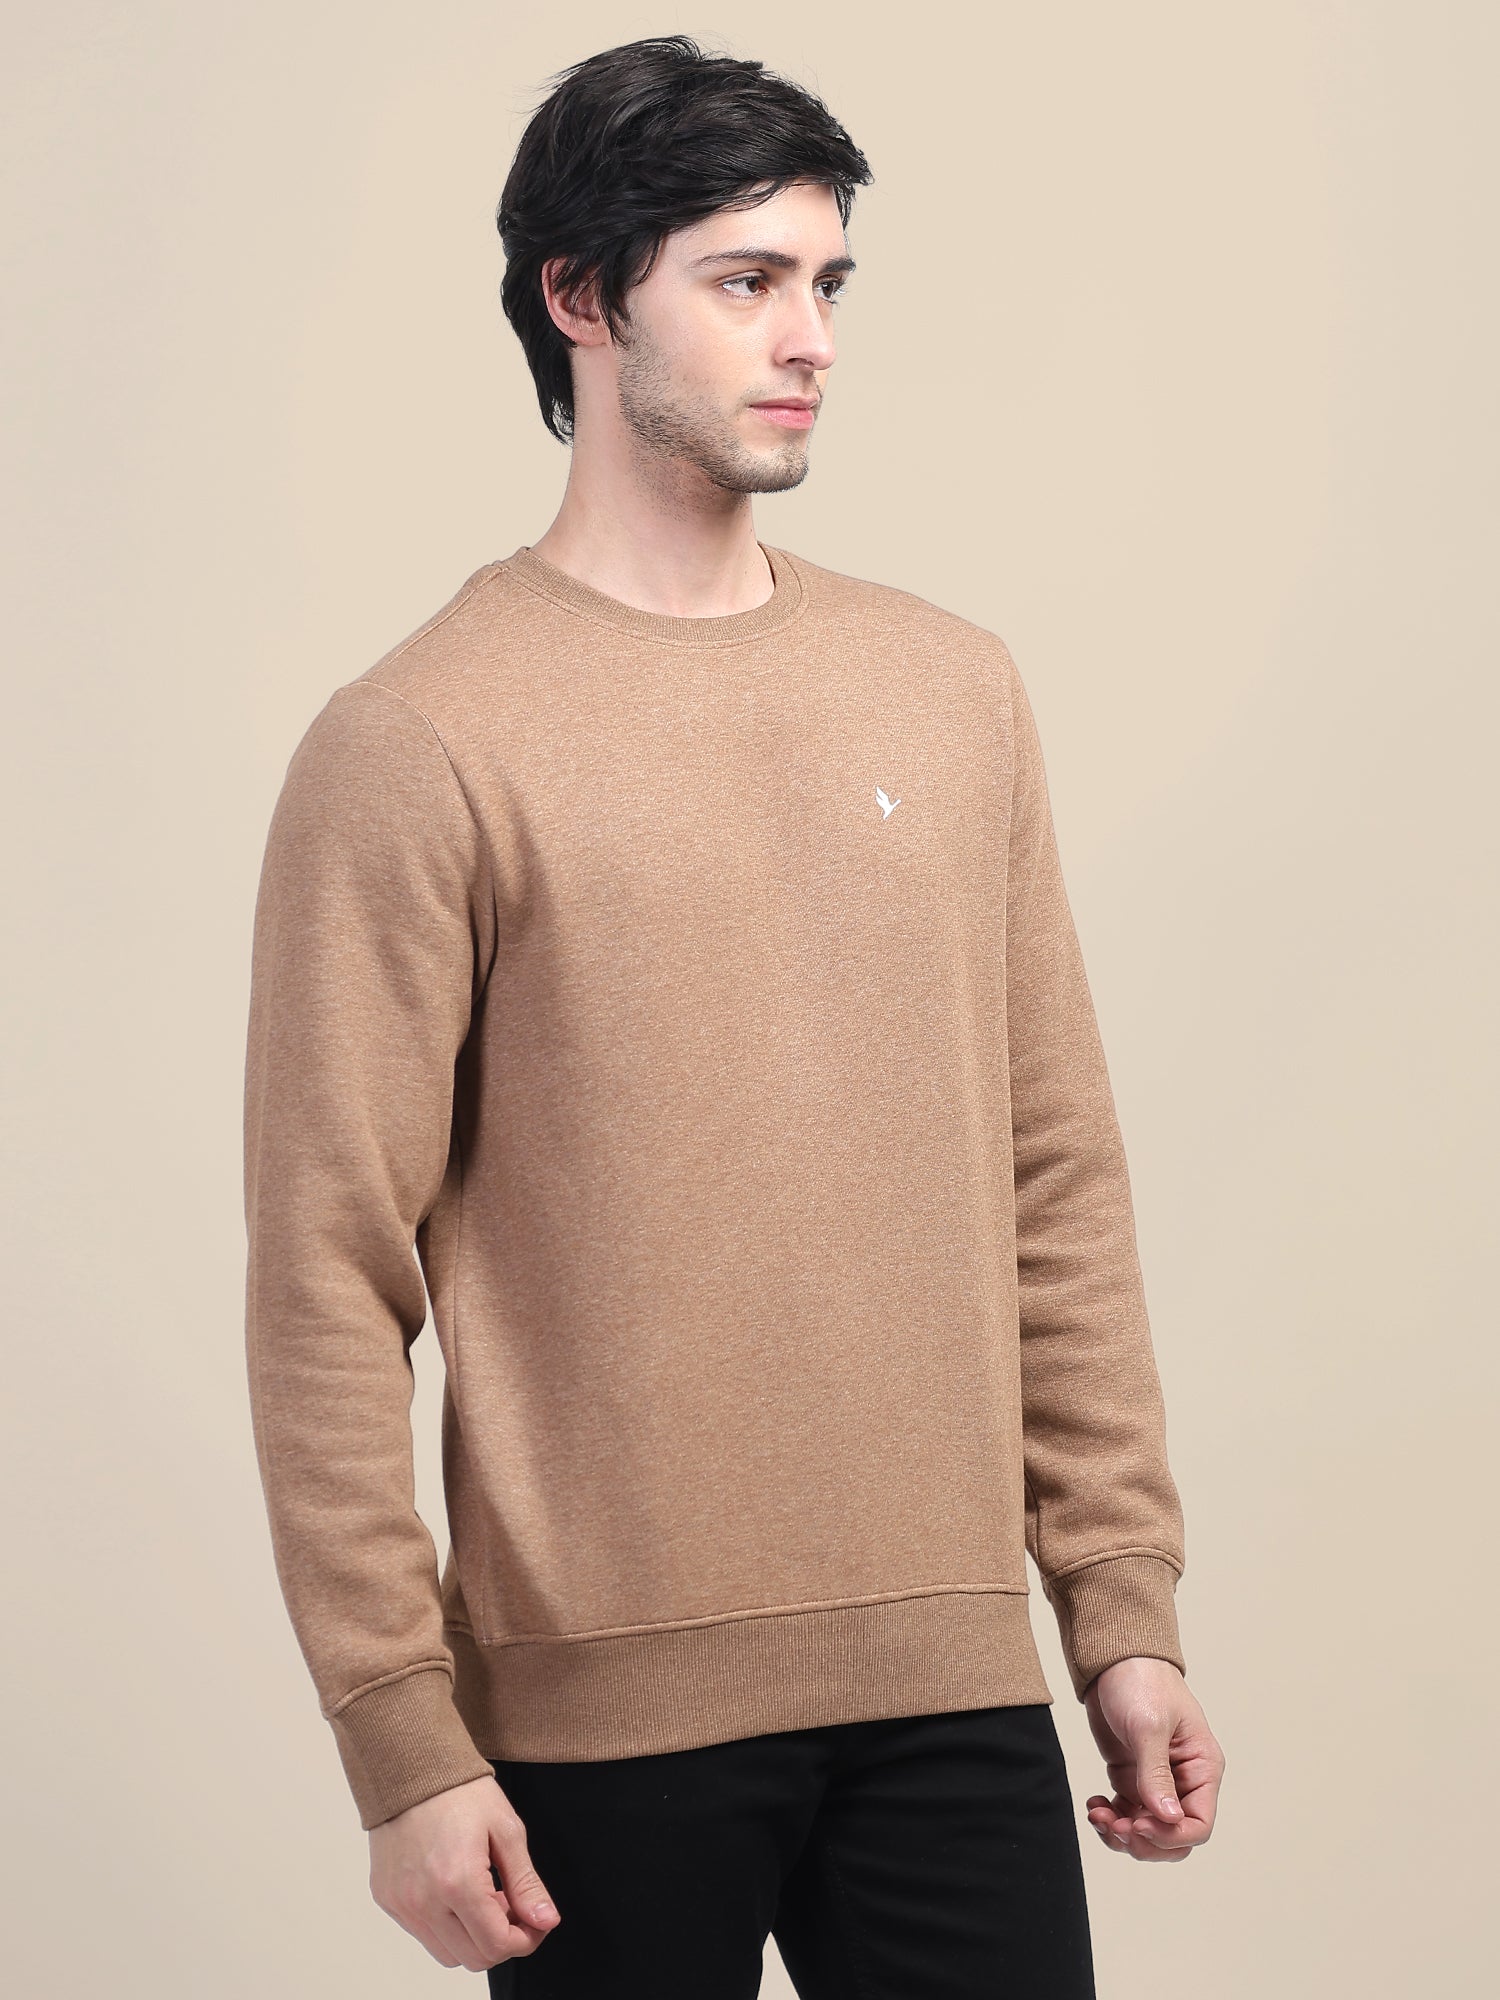 AMSWAN MEN'S BROWN SOLID COMFORT: PREMIUM COTTON SWEATSHIRT FOR TIMELESS STYLE AND COZY ELEGANCE